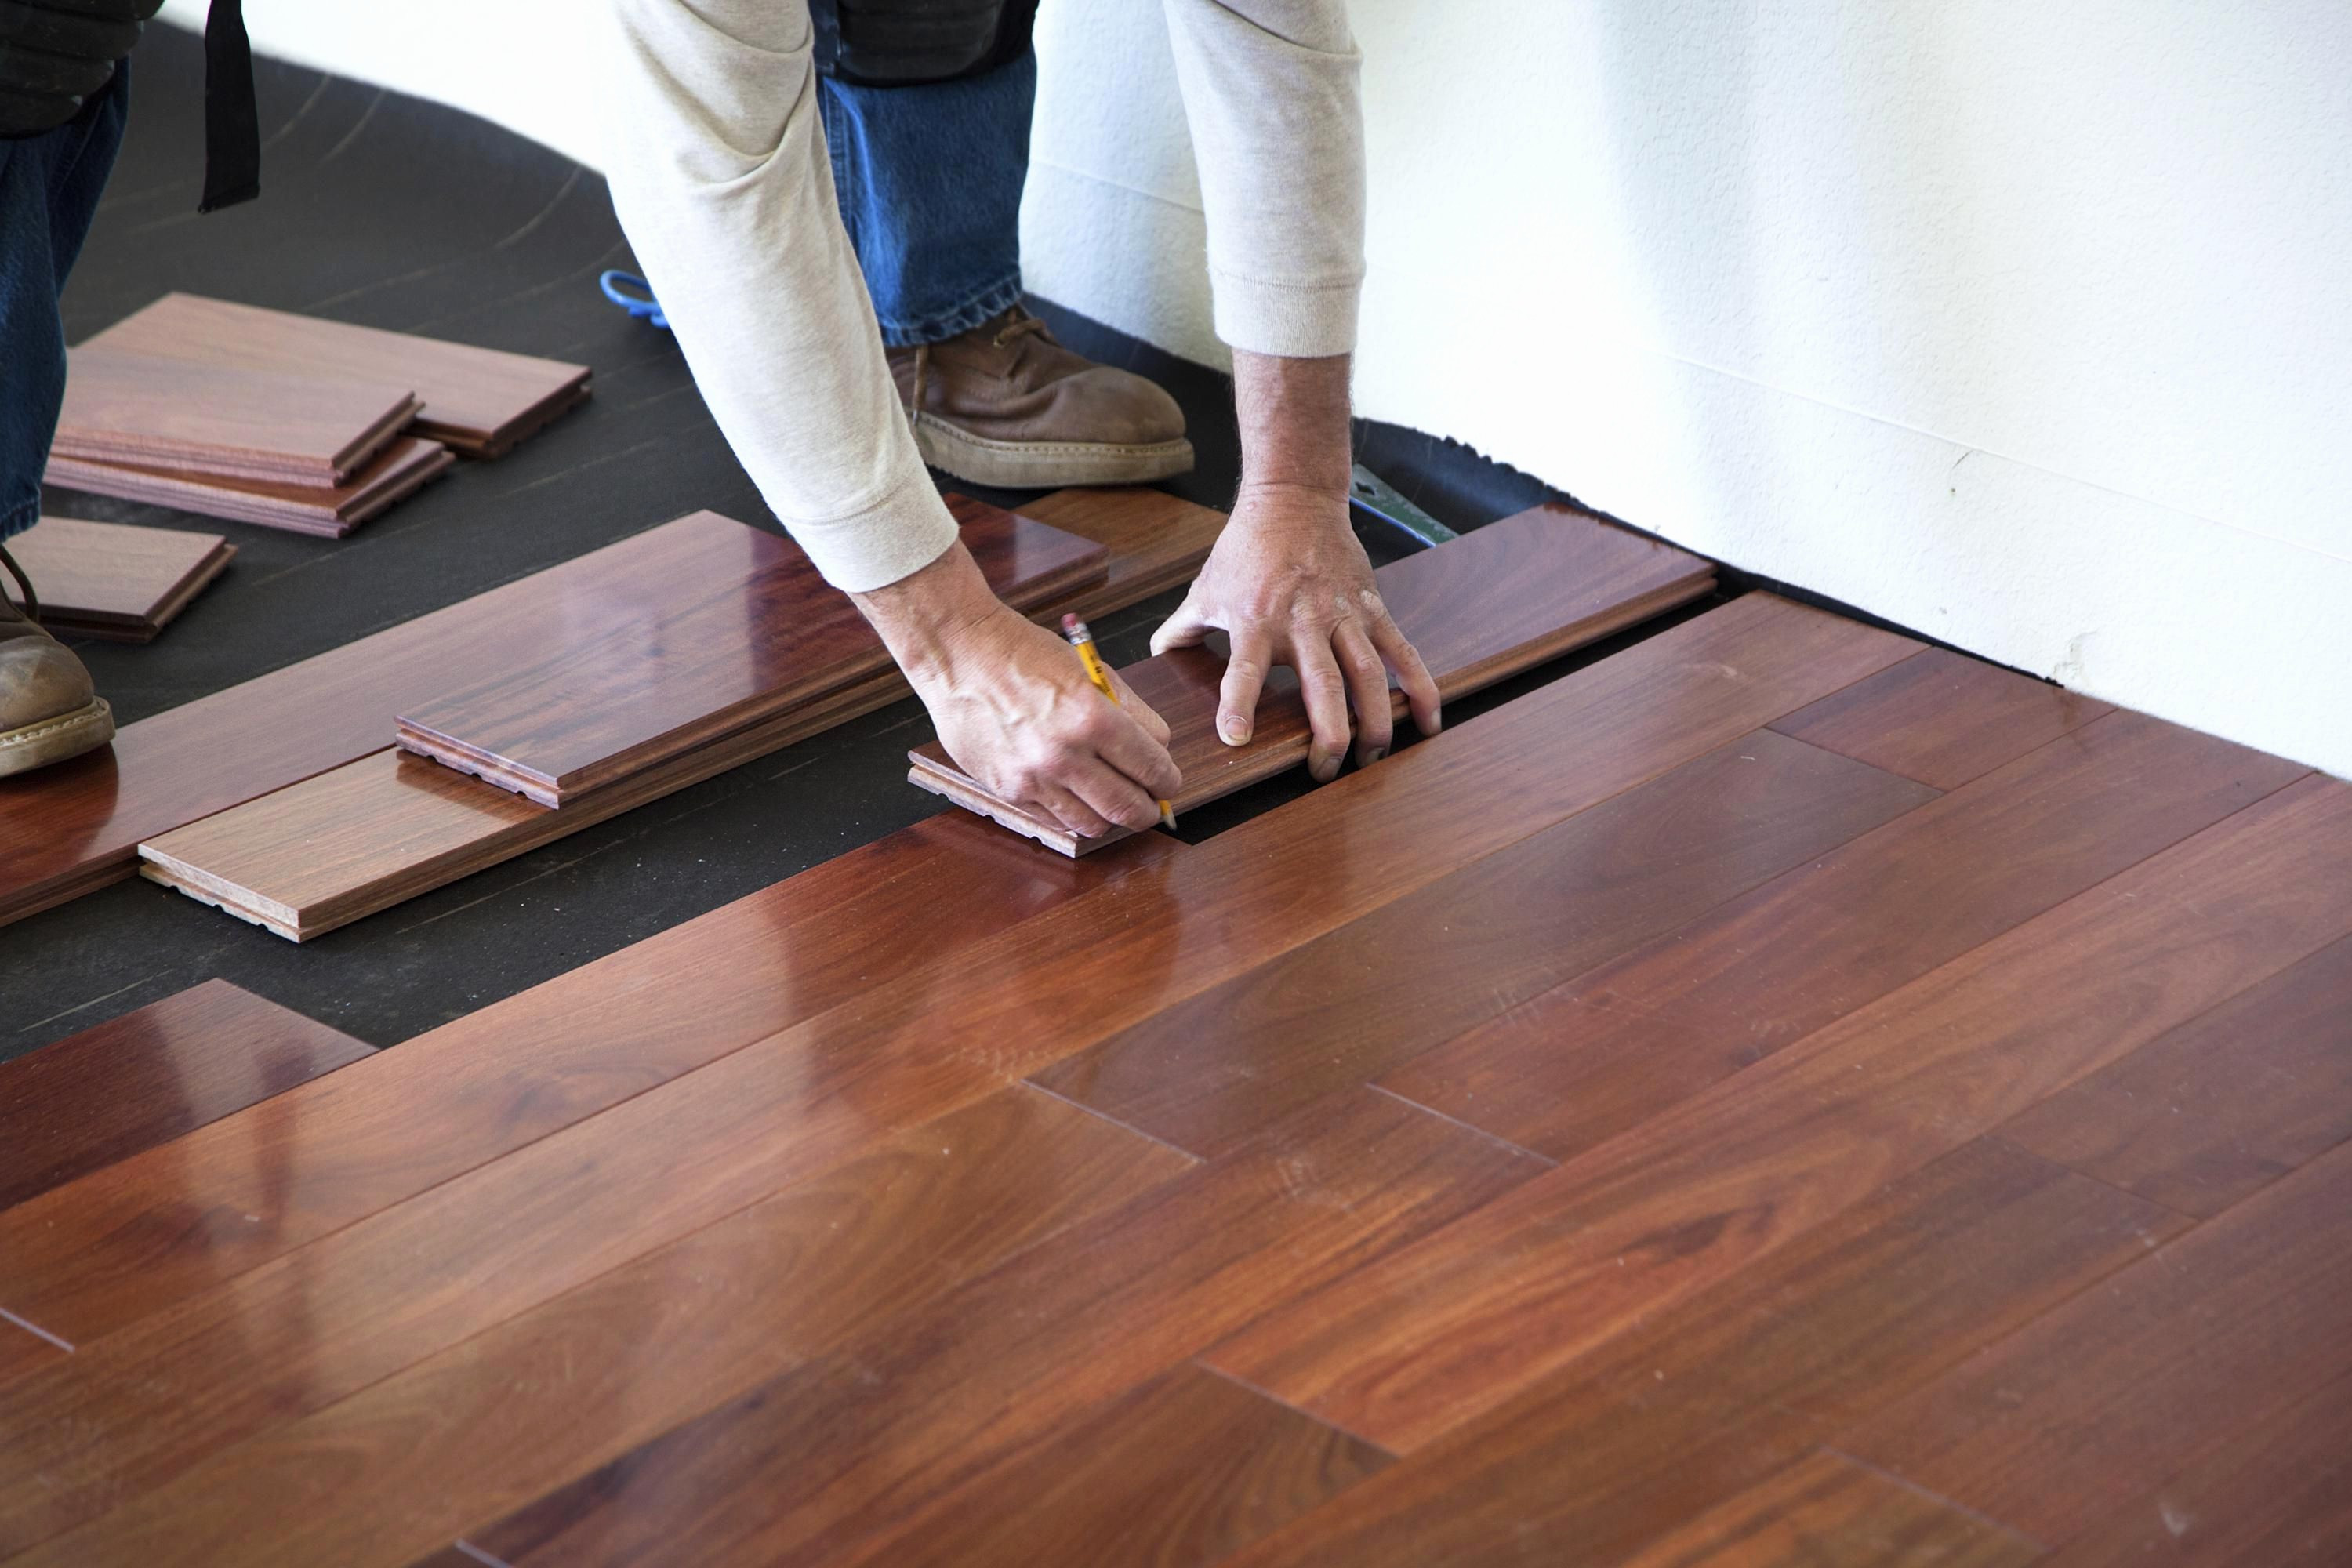 16 Best How to Refinish Hardwood Floors with Gaps 2024 free download how to refinish hardwood floors with gaps of 19 unique how much does it cost to refinish hardwood floors gallery within 50 best how to refinish hardwood floors without sanding pics 50